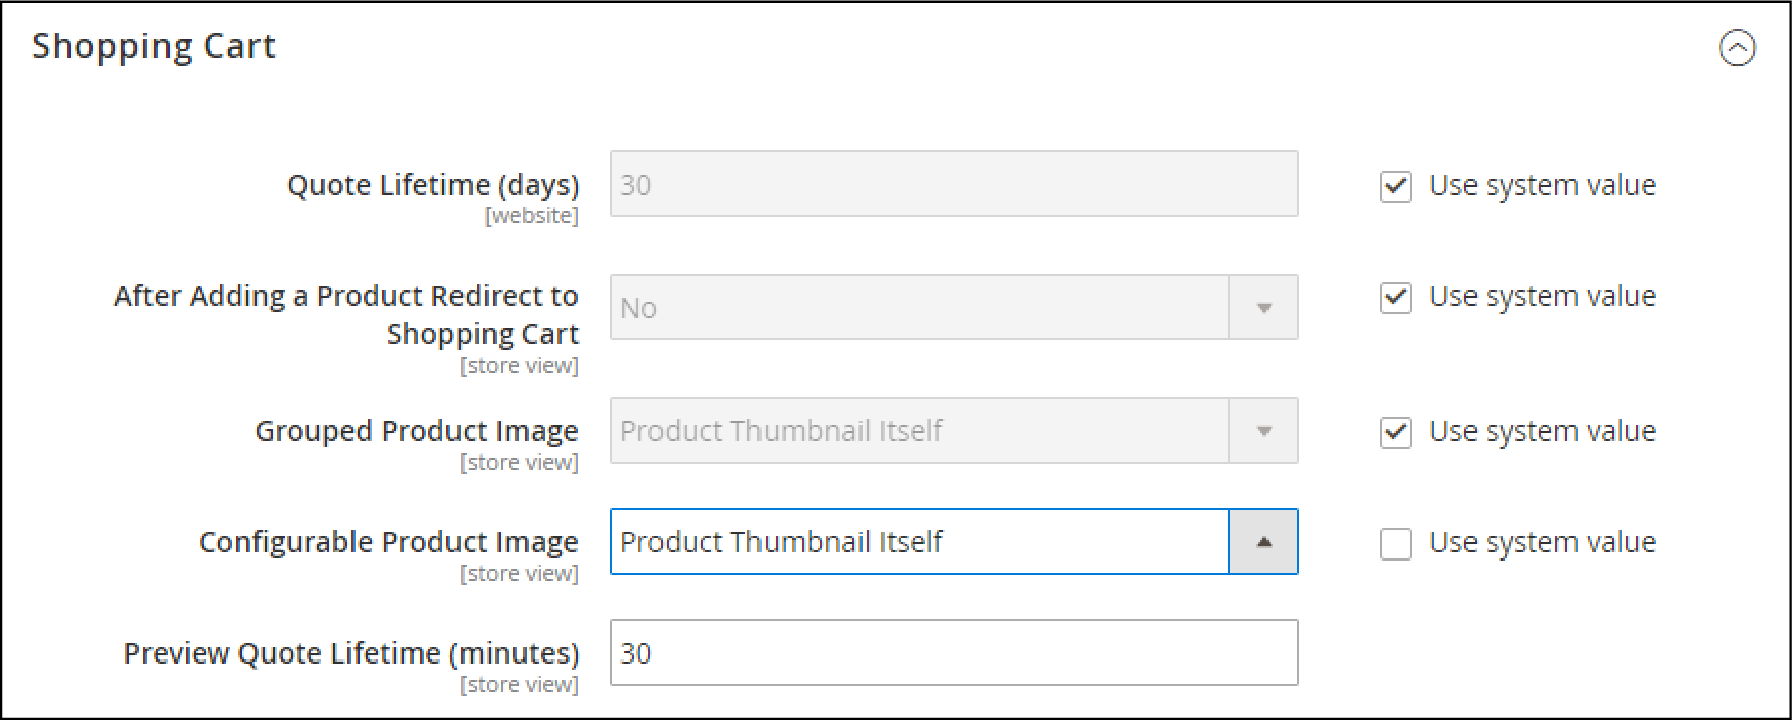 Configure Cart Thumbnails  -Configurable product in Magento 2